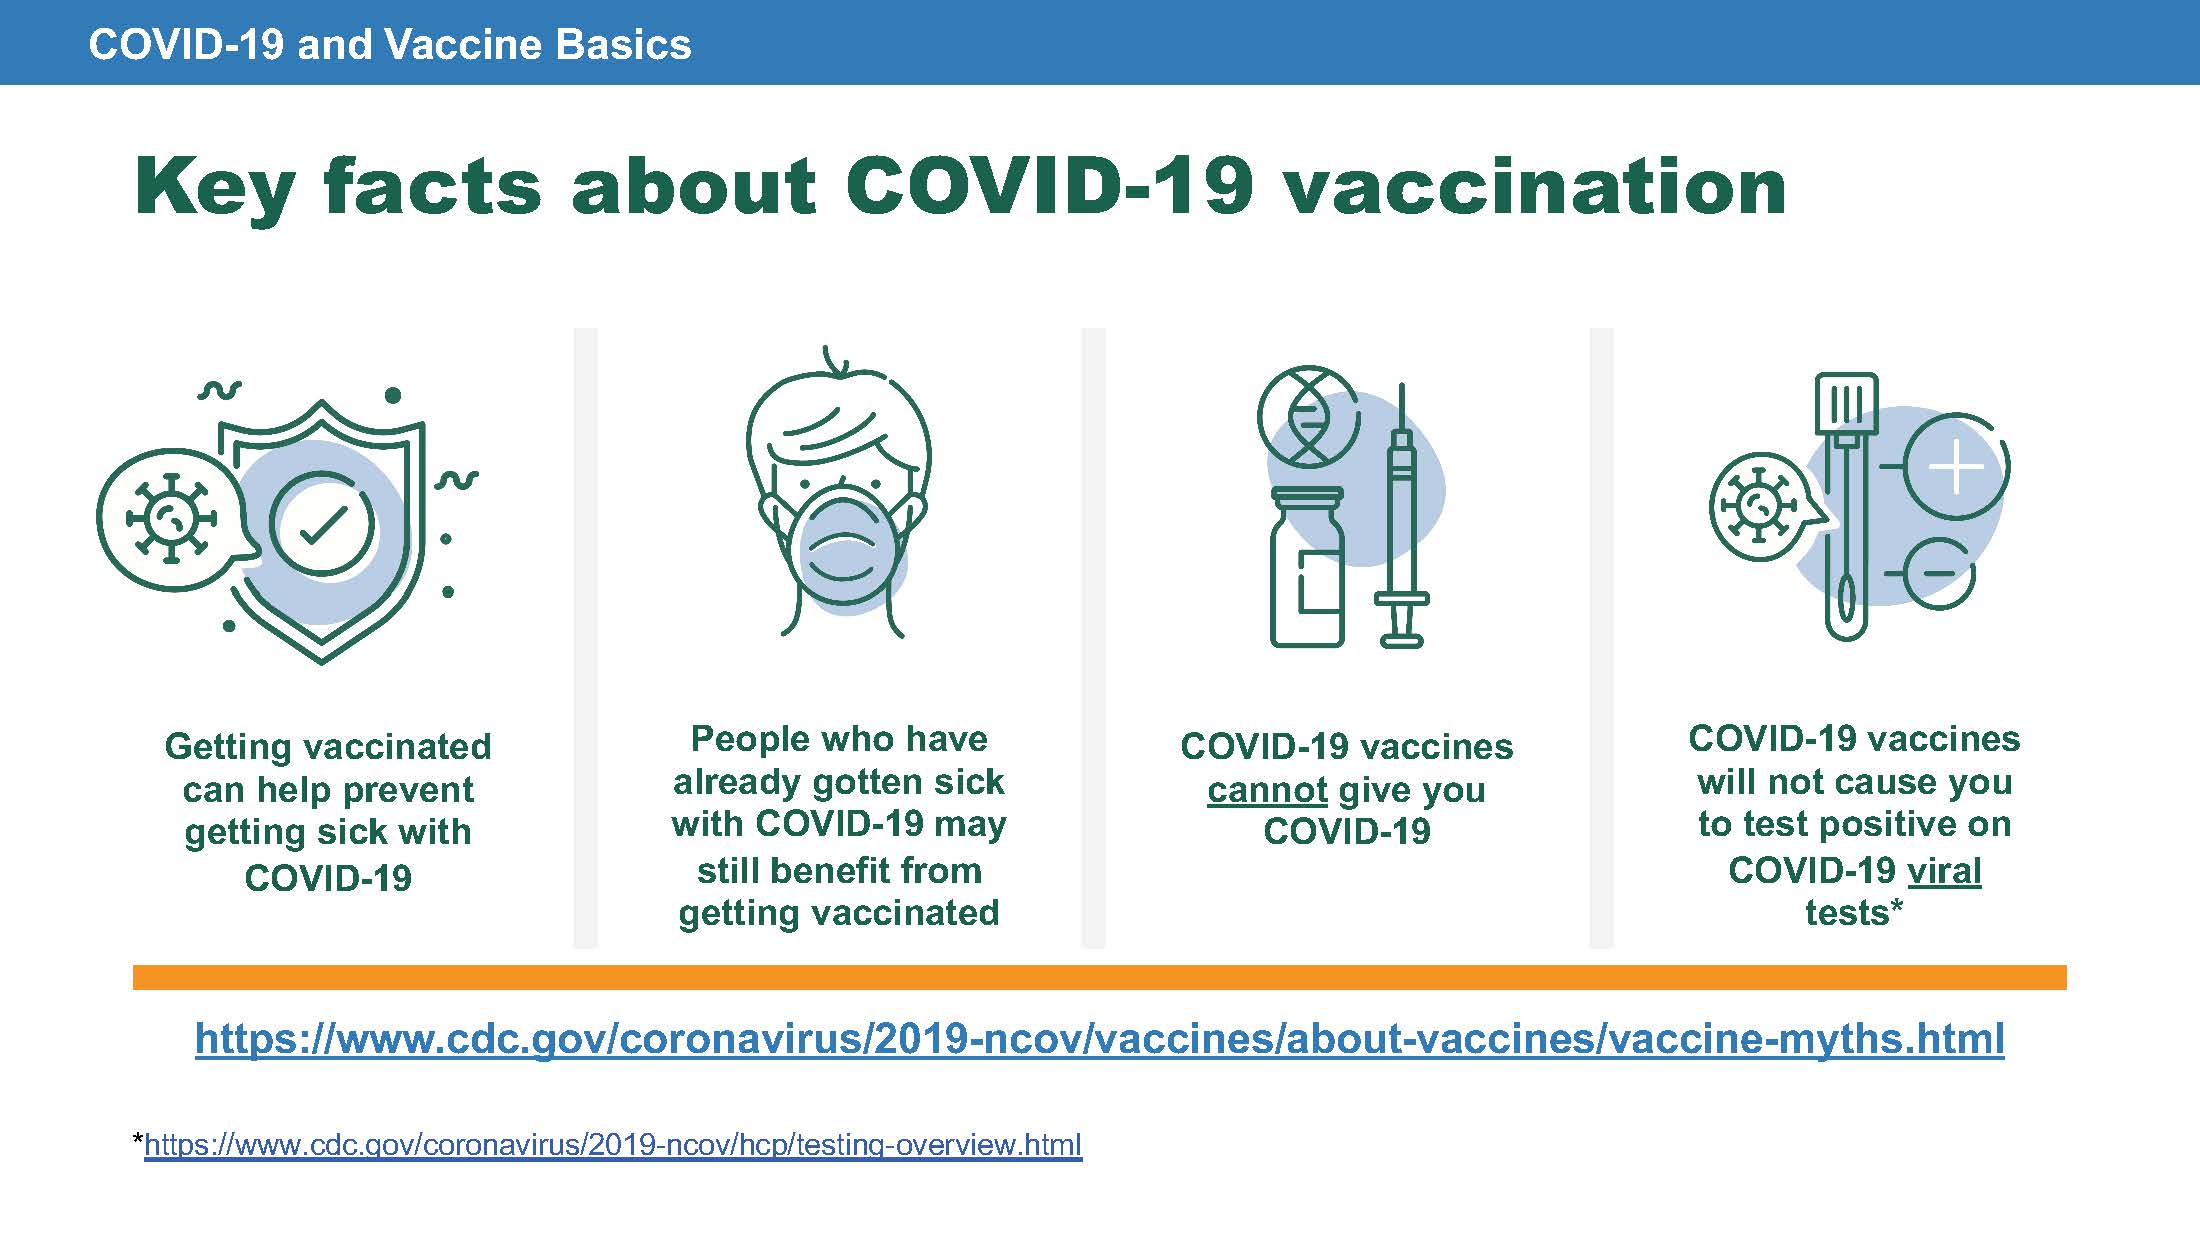 Key Facts about COVID-19 Vaccines